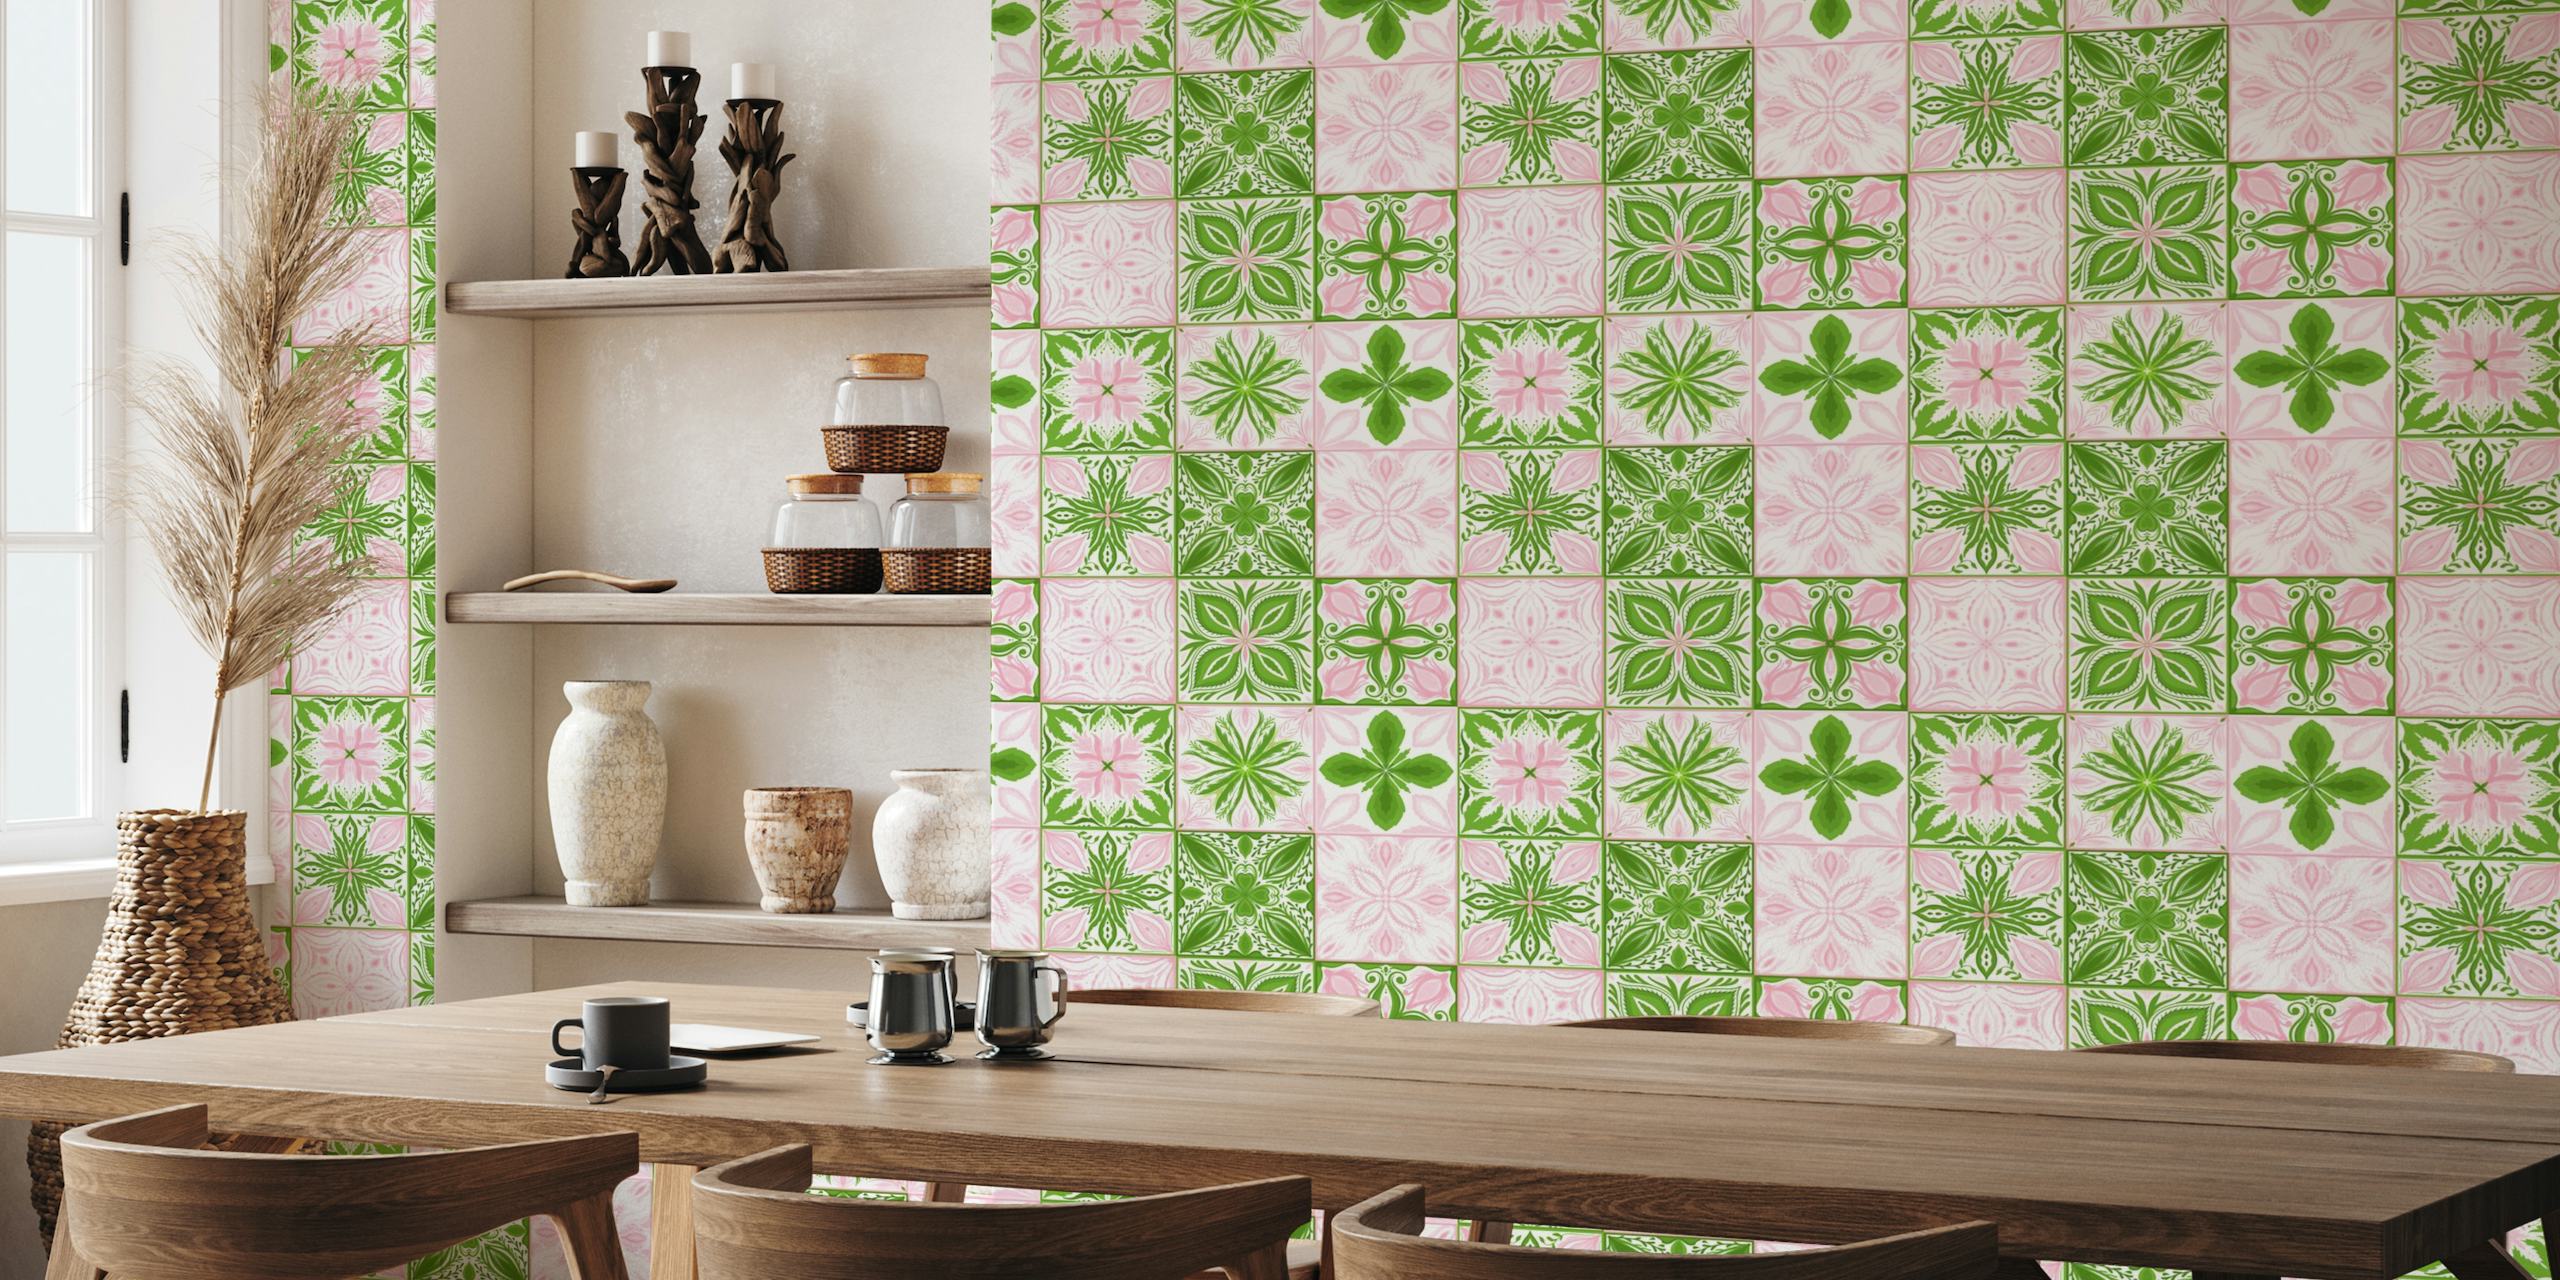 Ornate tiles in pink and green tapet